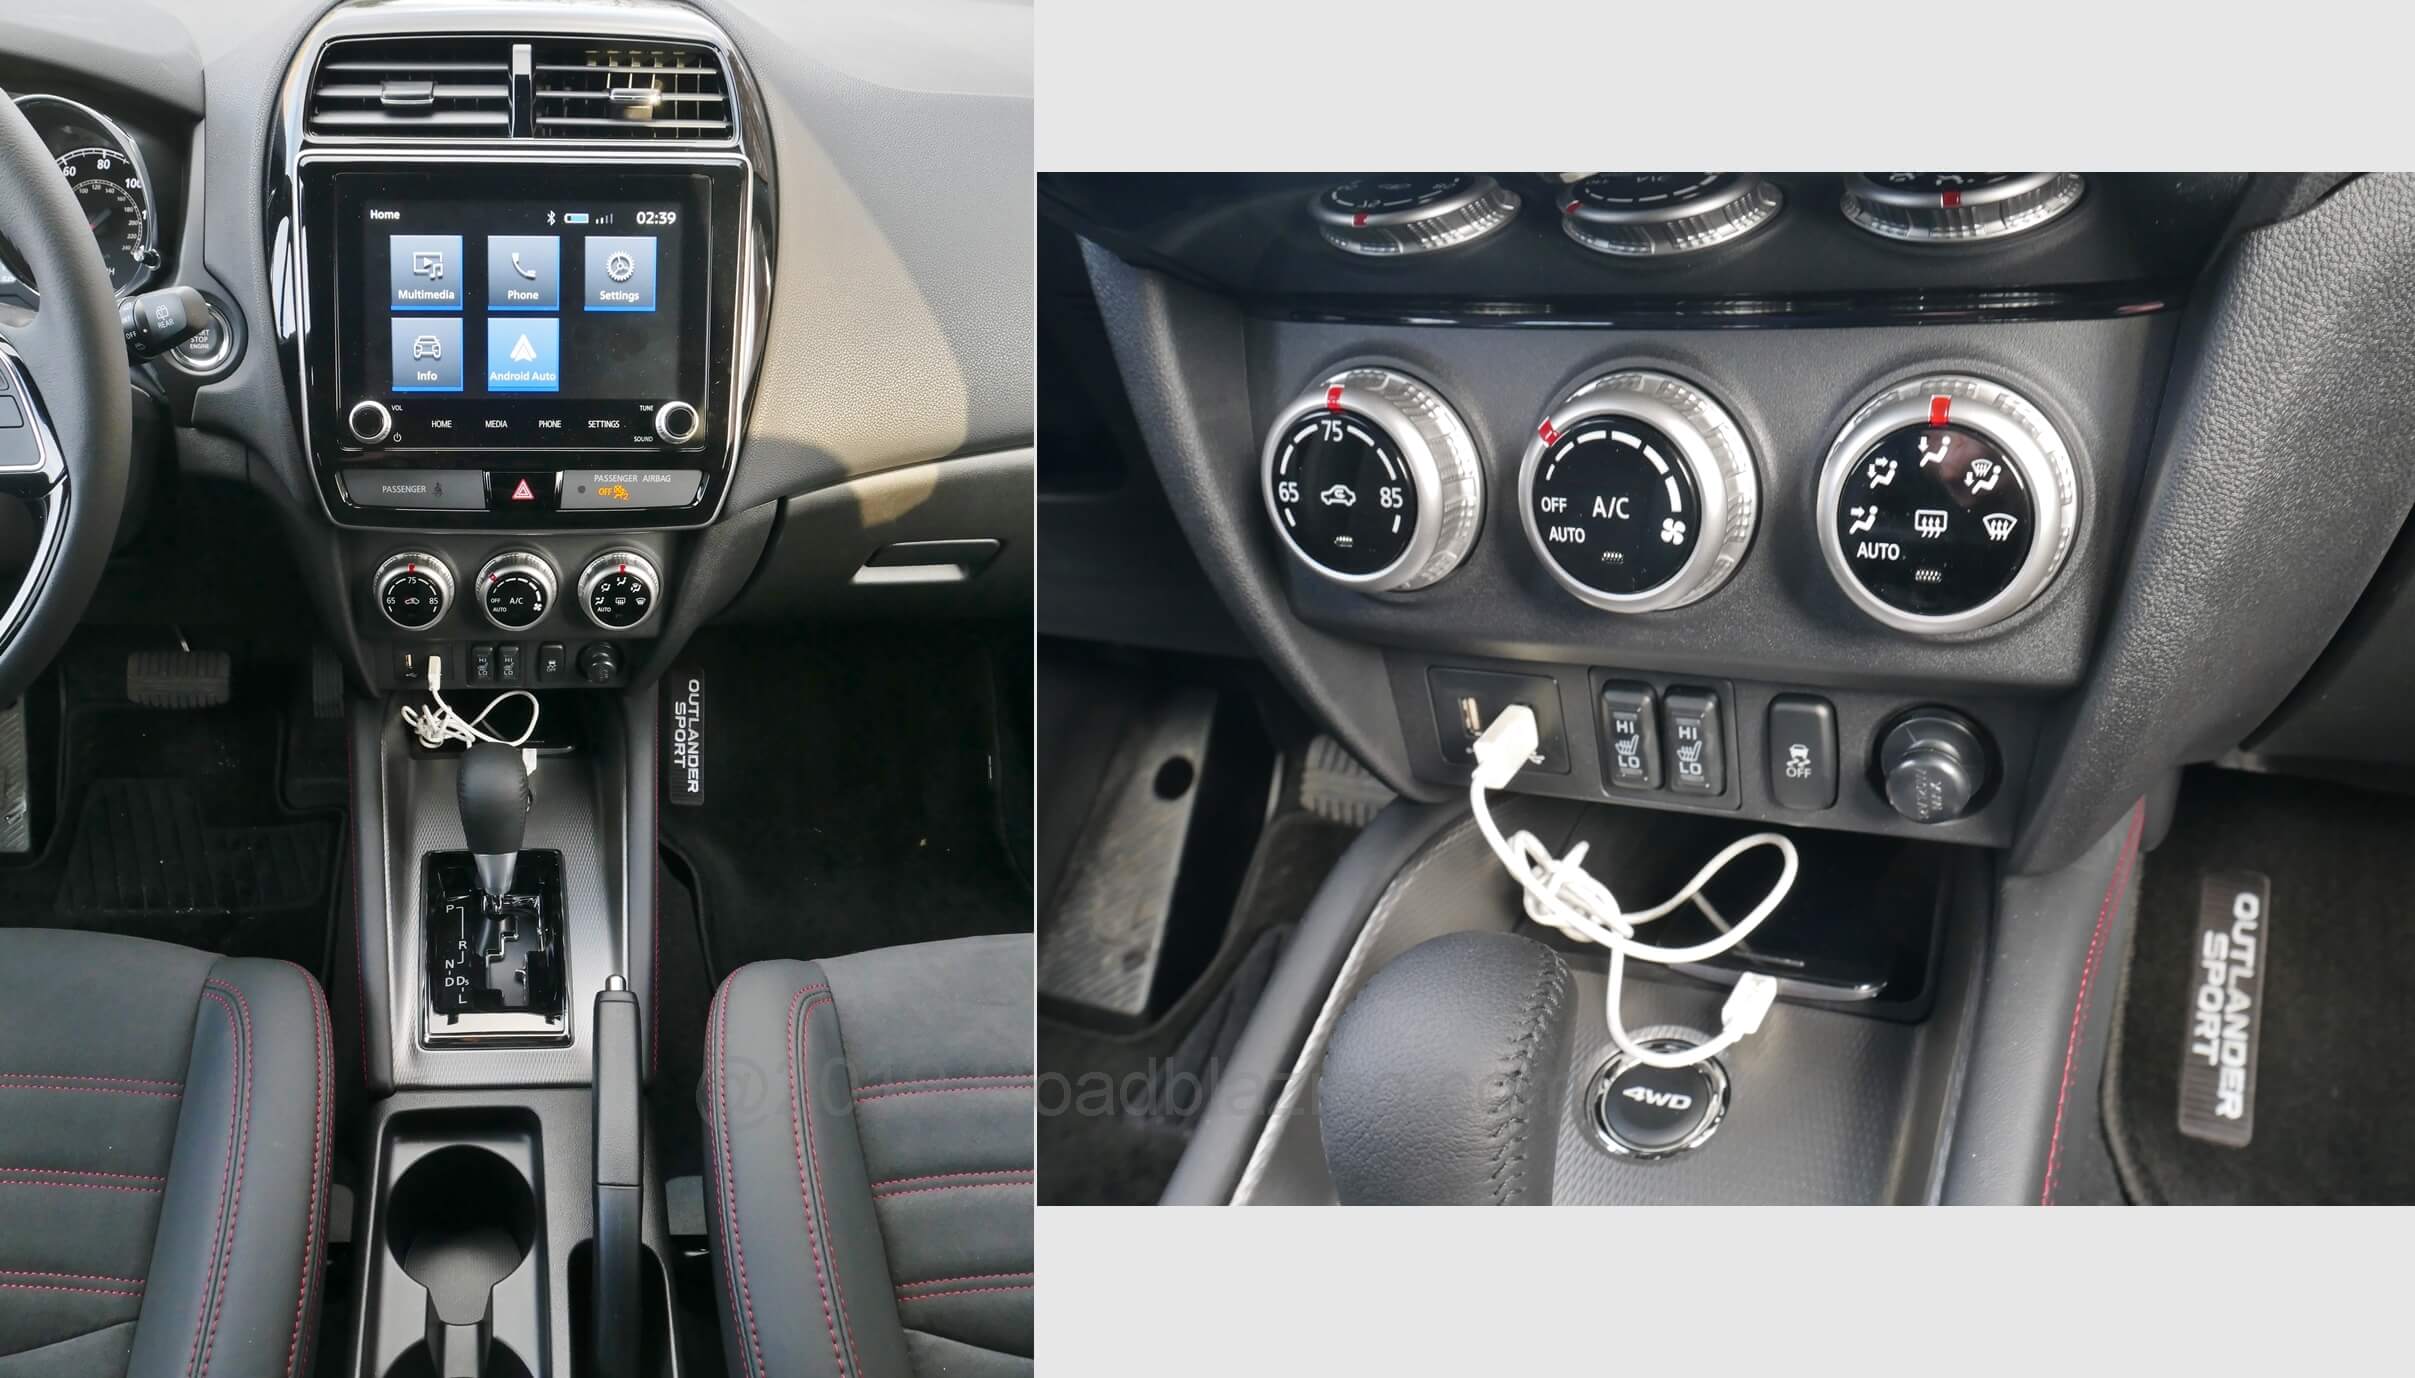 2020 Mitsubishi Outlander Sport 2.4 GT AWC: Native 8.0" media screen menu is simple though sparse. Oversized automatic climate knobs and seat warming switches are mounted too low